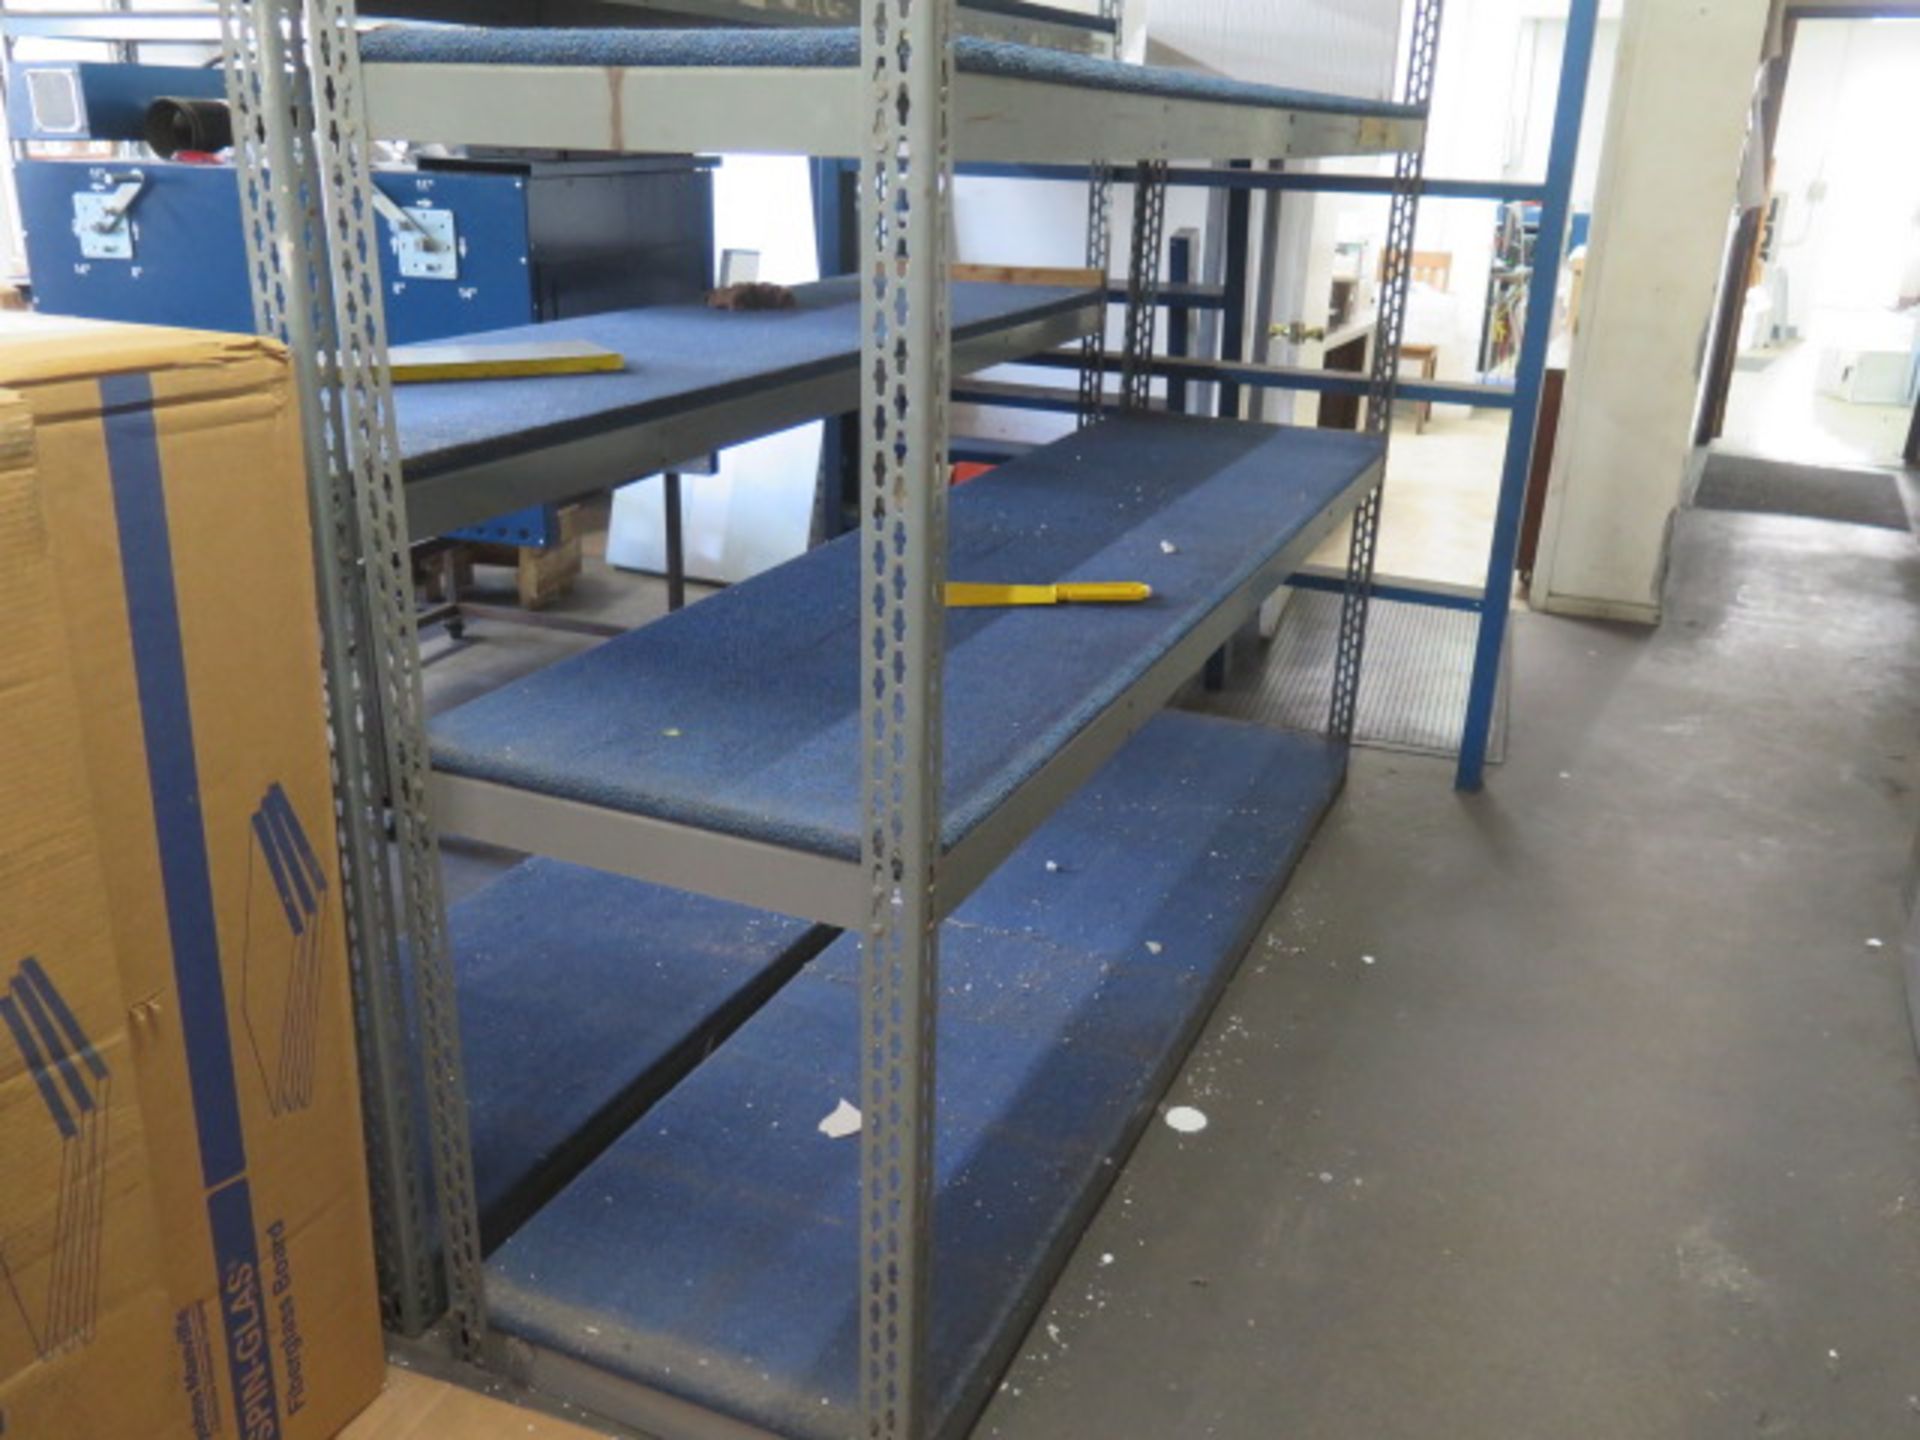 Shelving and Racks (SOLD AS-IS - NO WARRANTY) - Image 3 of 6